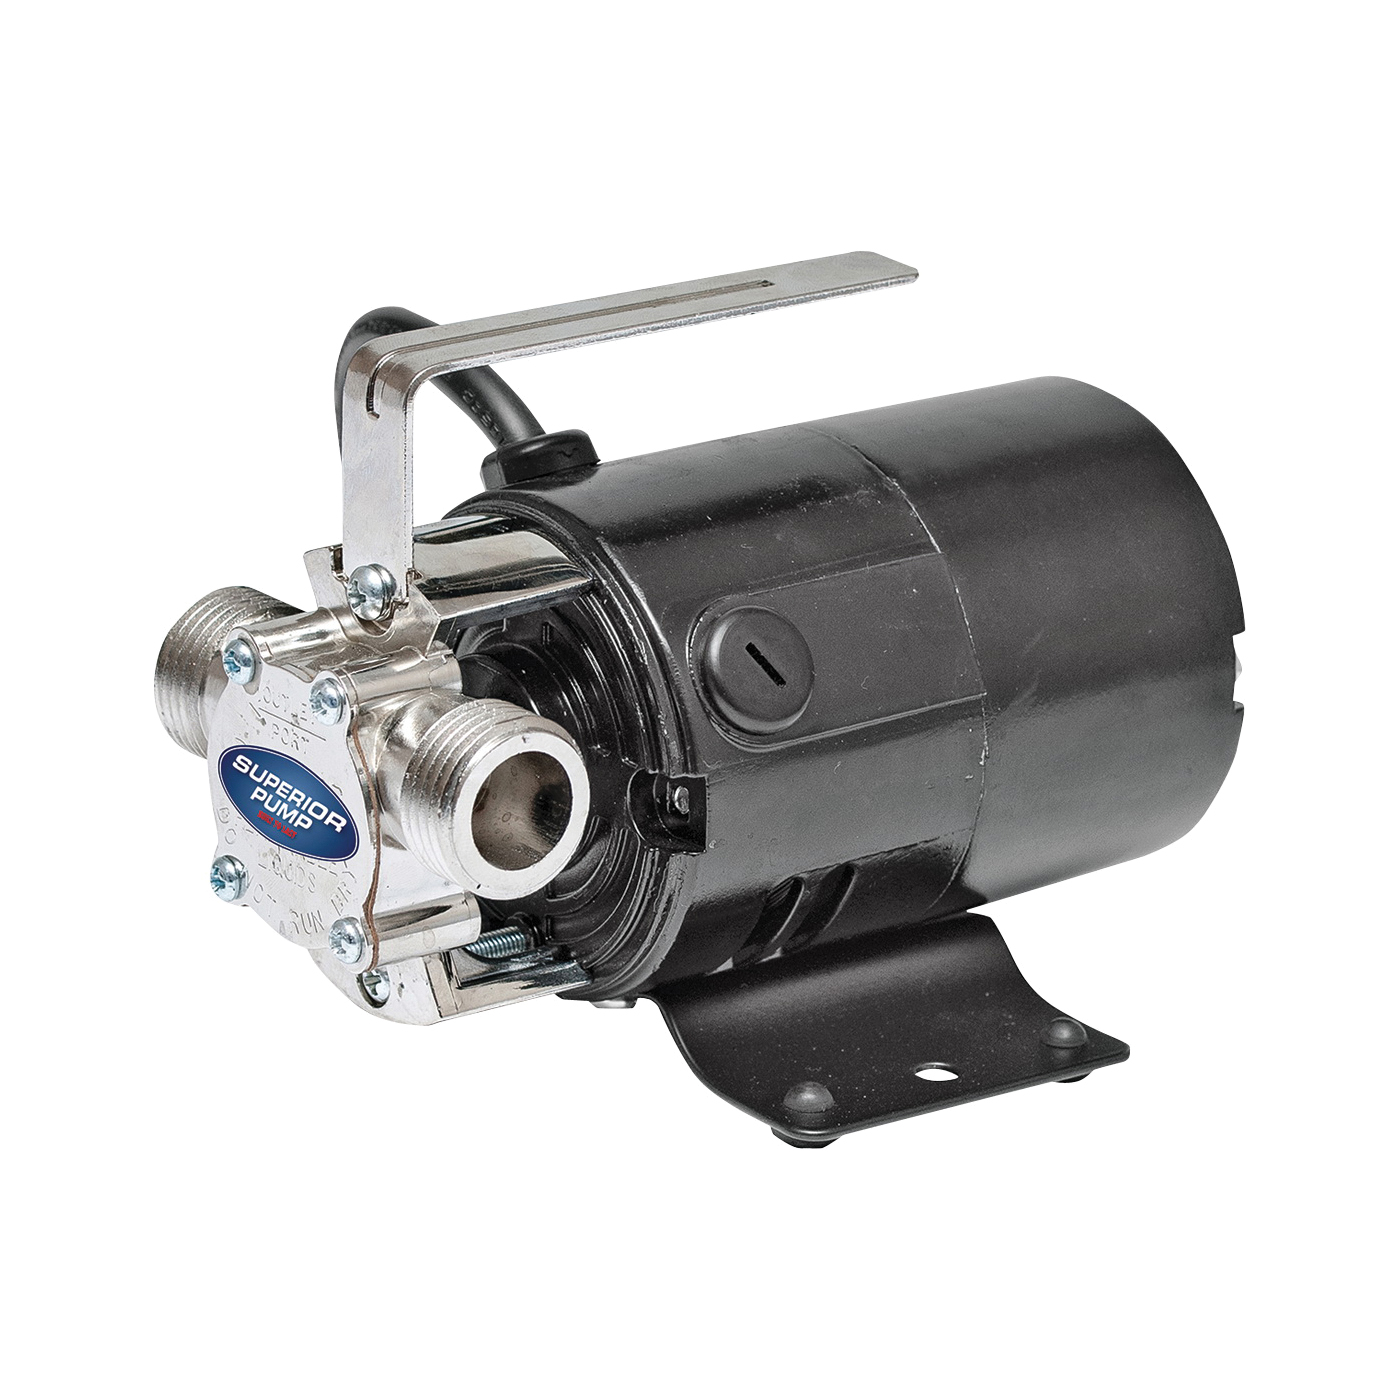 90040 Transfer Pump, 2.3 A, 115 V, 0.1 hp, 3/4 in Outlet, 330 gal/hr, Iron